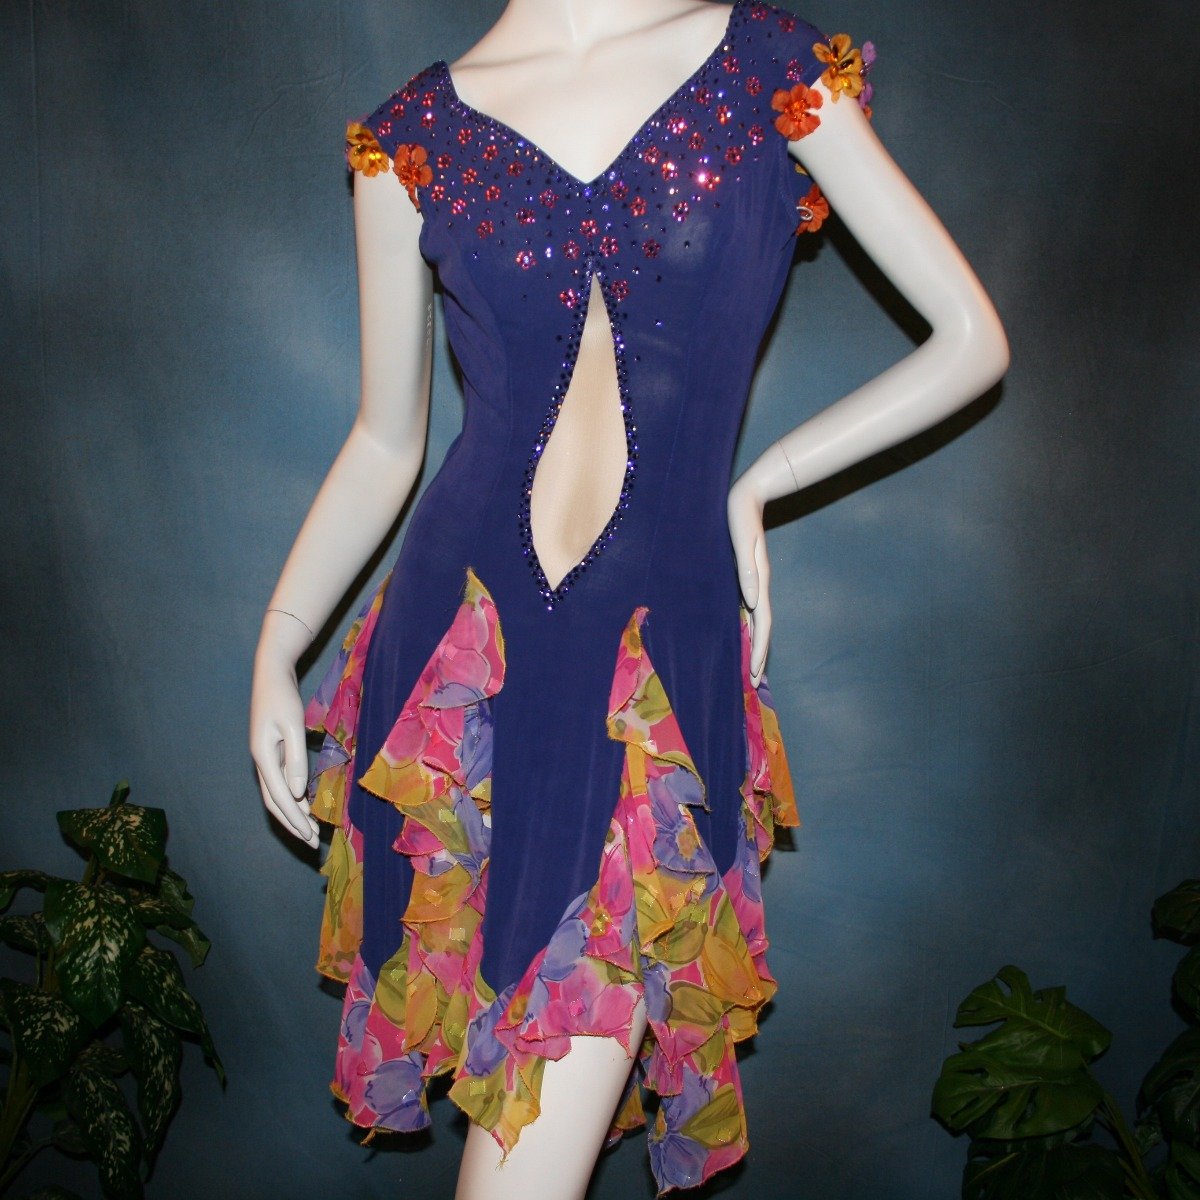 Crystal's Creations close up view of Converta ballroom dress featuring a Latin/rhythm dress created in luxurious deep perwinkle solid slinky with lots of flounces in accents of a floral chiffon in yellow with pinks & purples